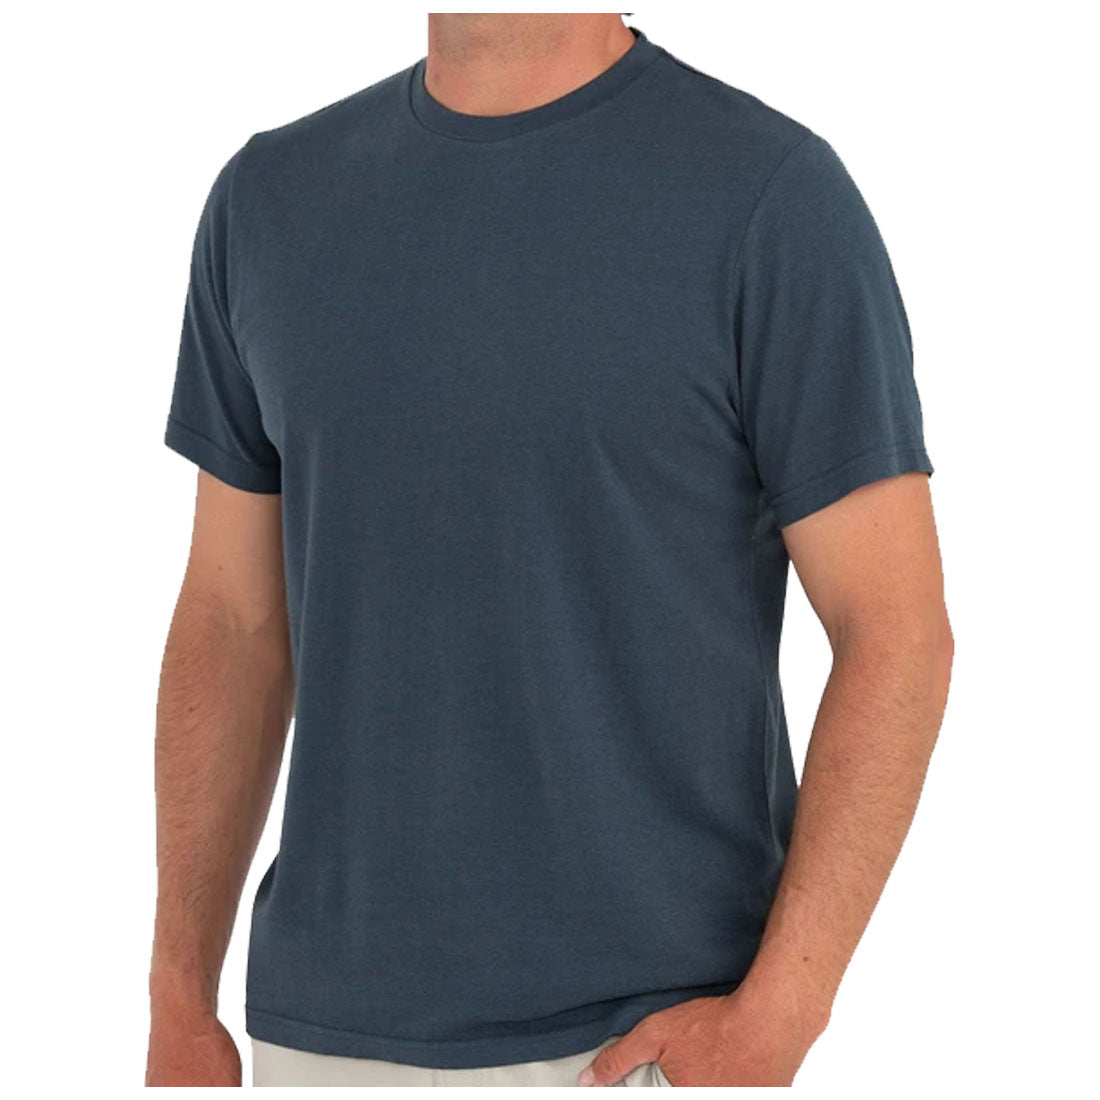 Free Fly Bamboo Heritage Tee - Men's